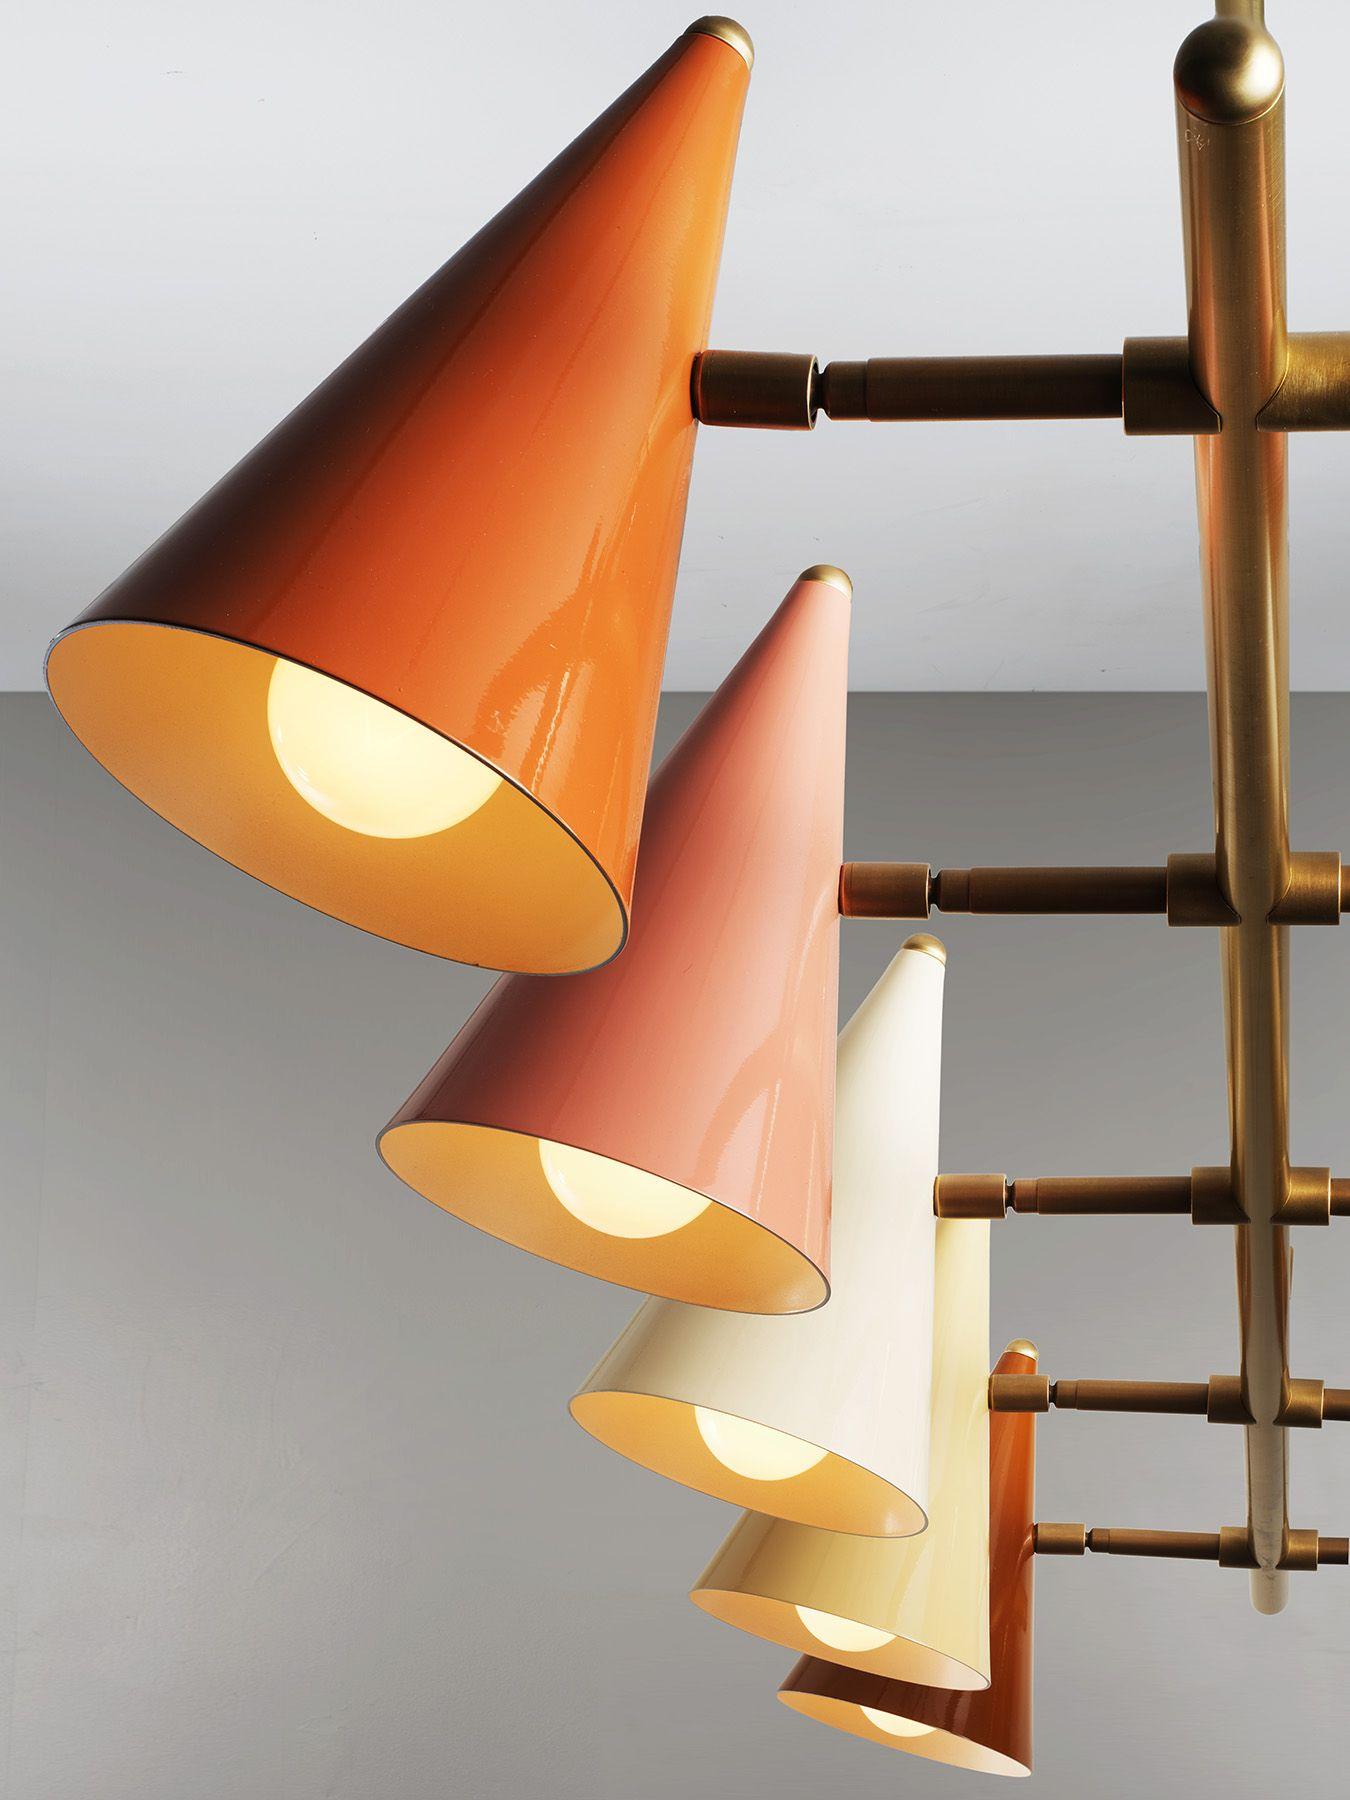 FLOTILLA Chandelier in Brass and Terracotta Enamel by Blueprint Lighting 2021 In New Condition For Sale In New York, NY